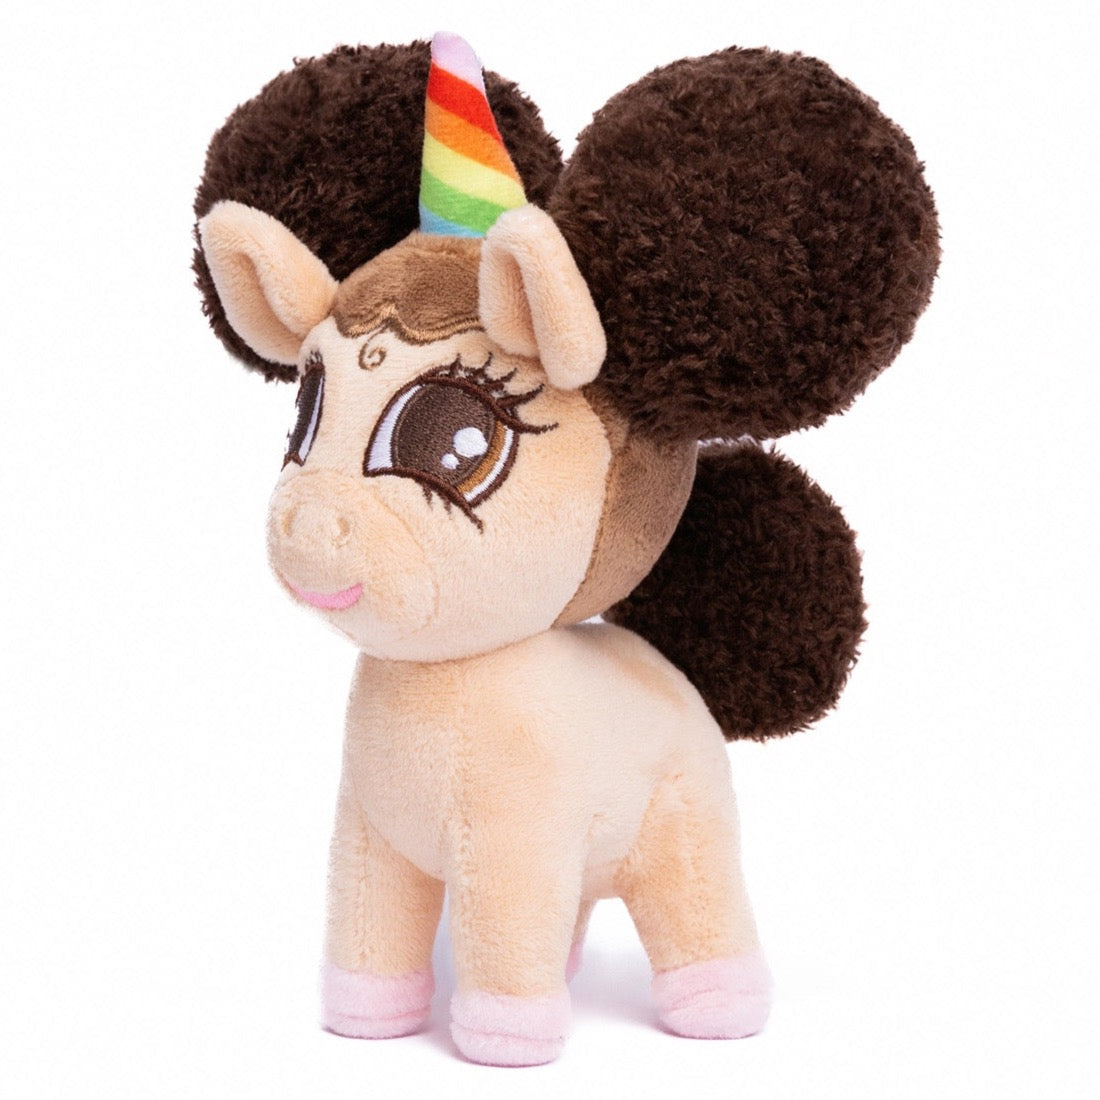 Baby Alexis Unicorn Plush Toy with Afro Puffs (standing) - 6 inch